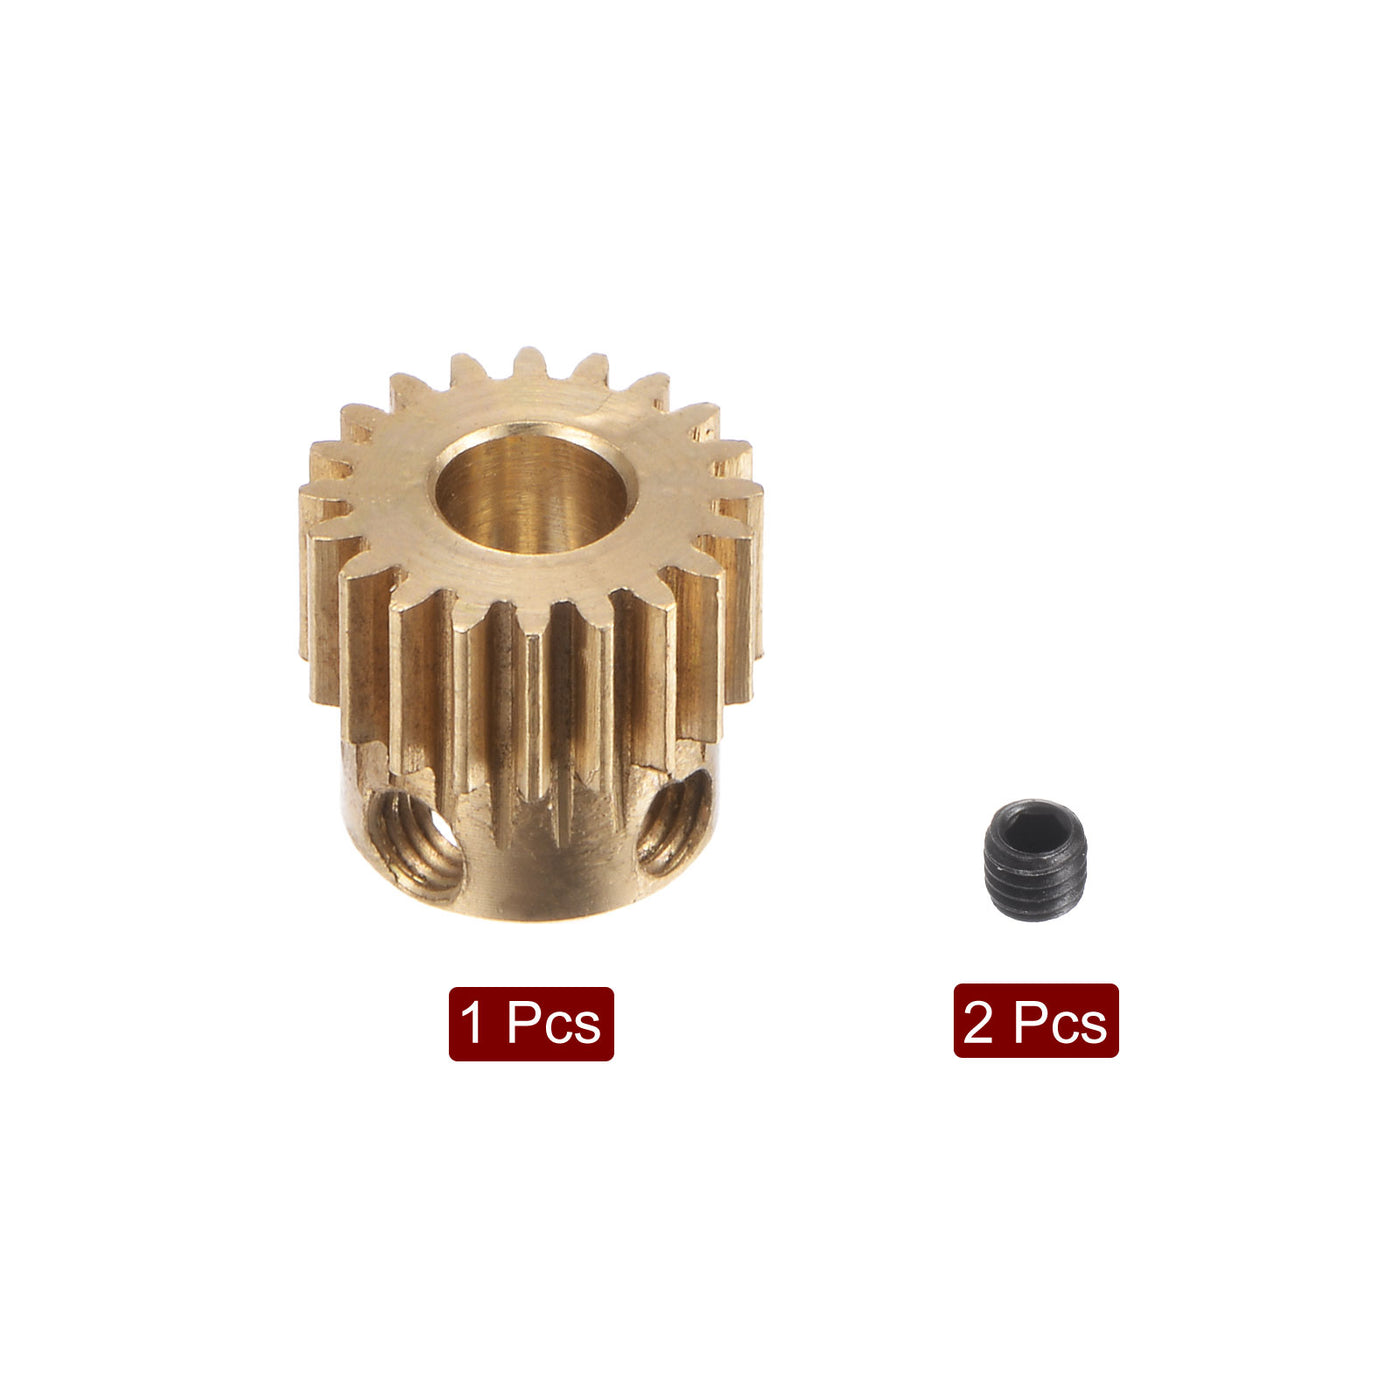 uxcell Uxcell 0.5 Mod 20T 4mm Bore 11mm Outer Dia Brass Motor Rack Pinion Gear with Screws